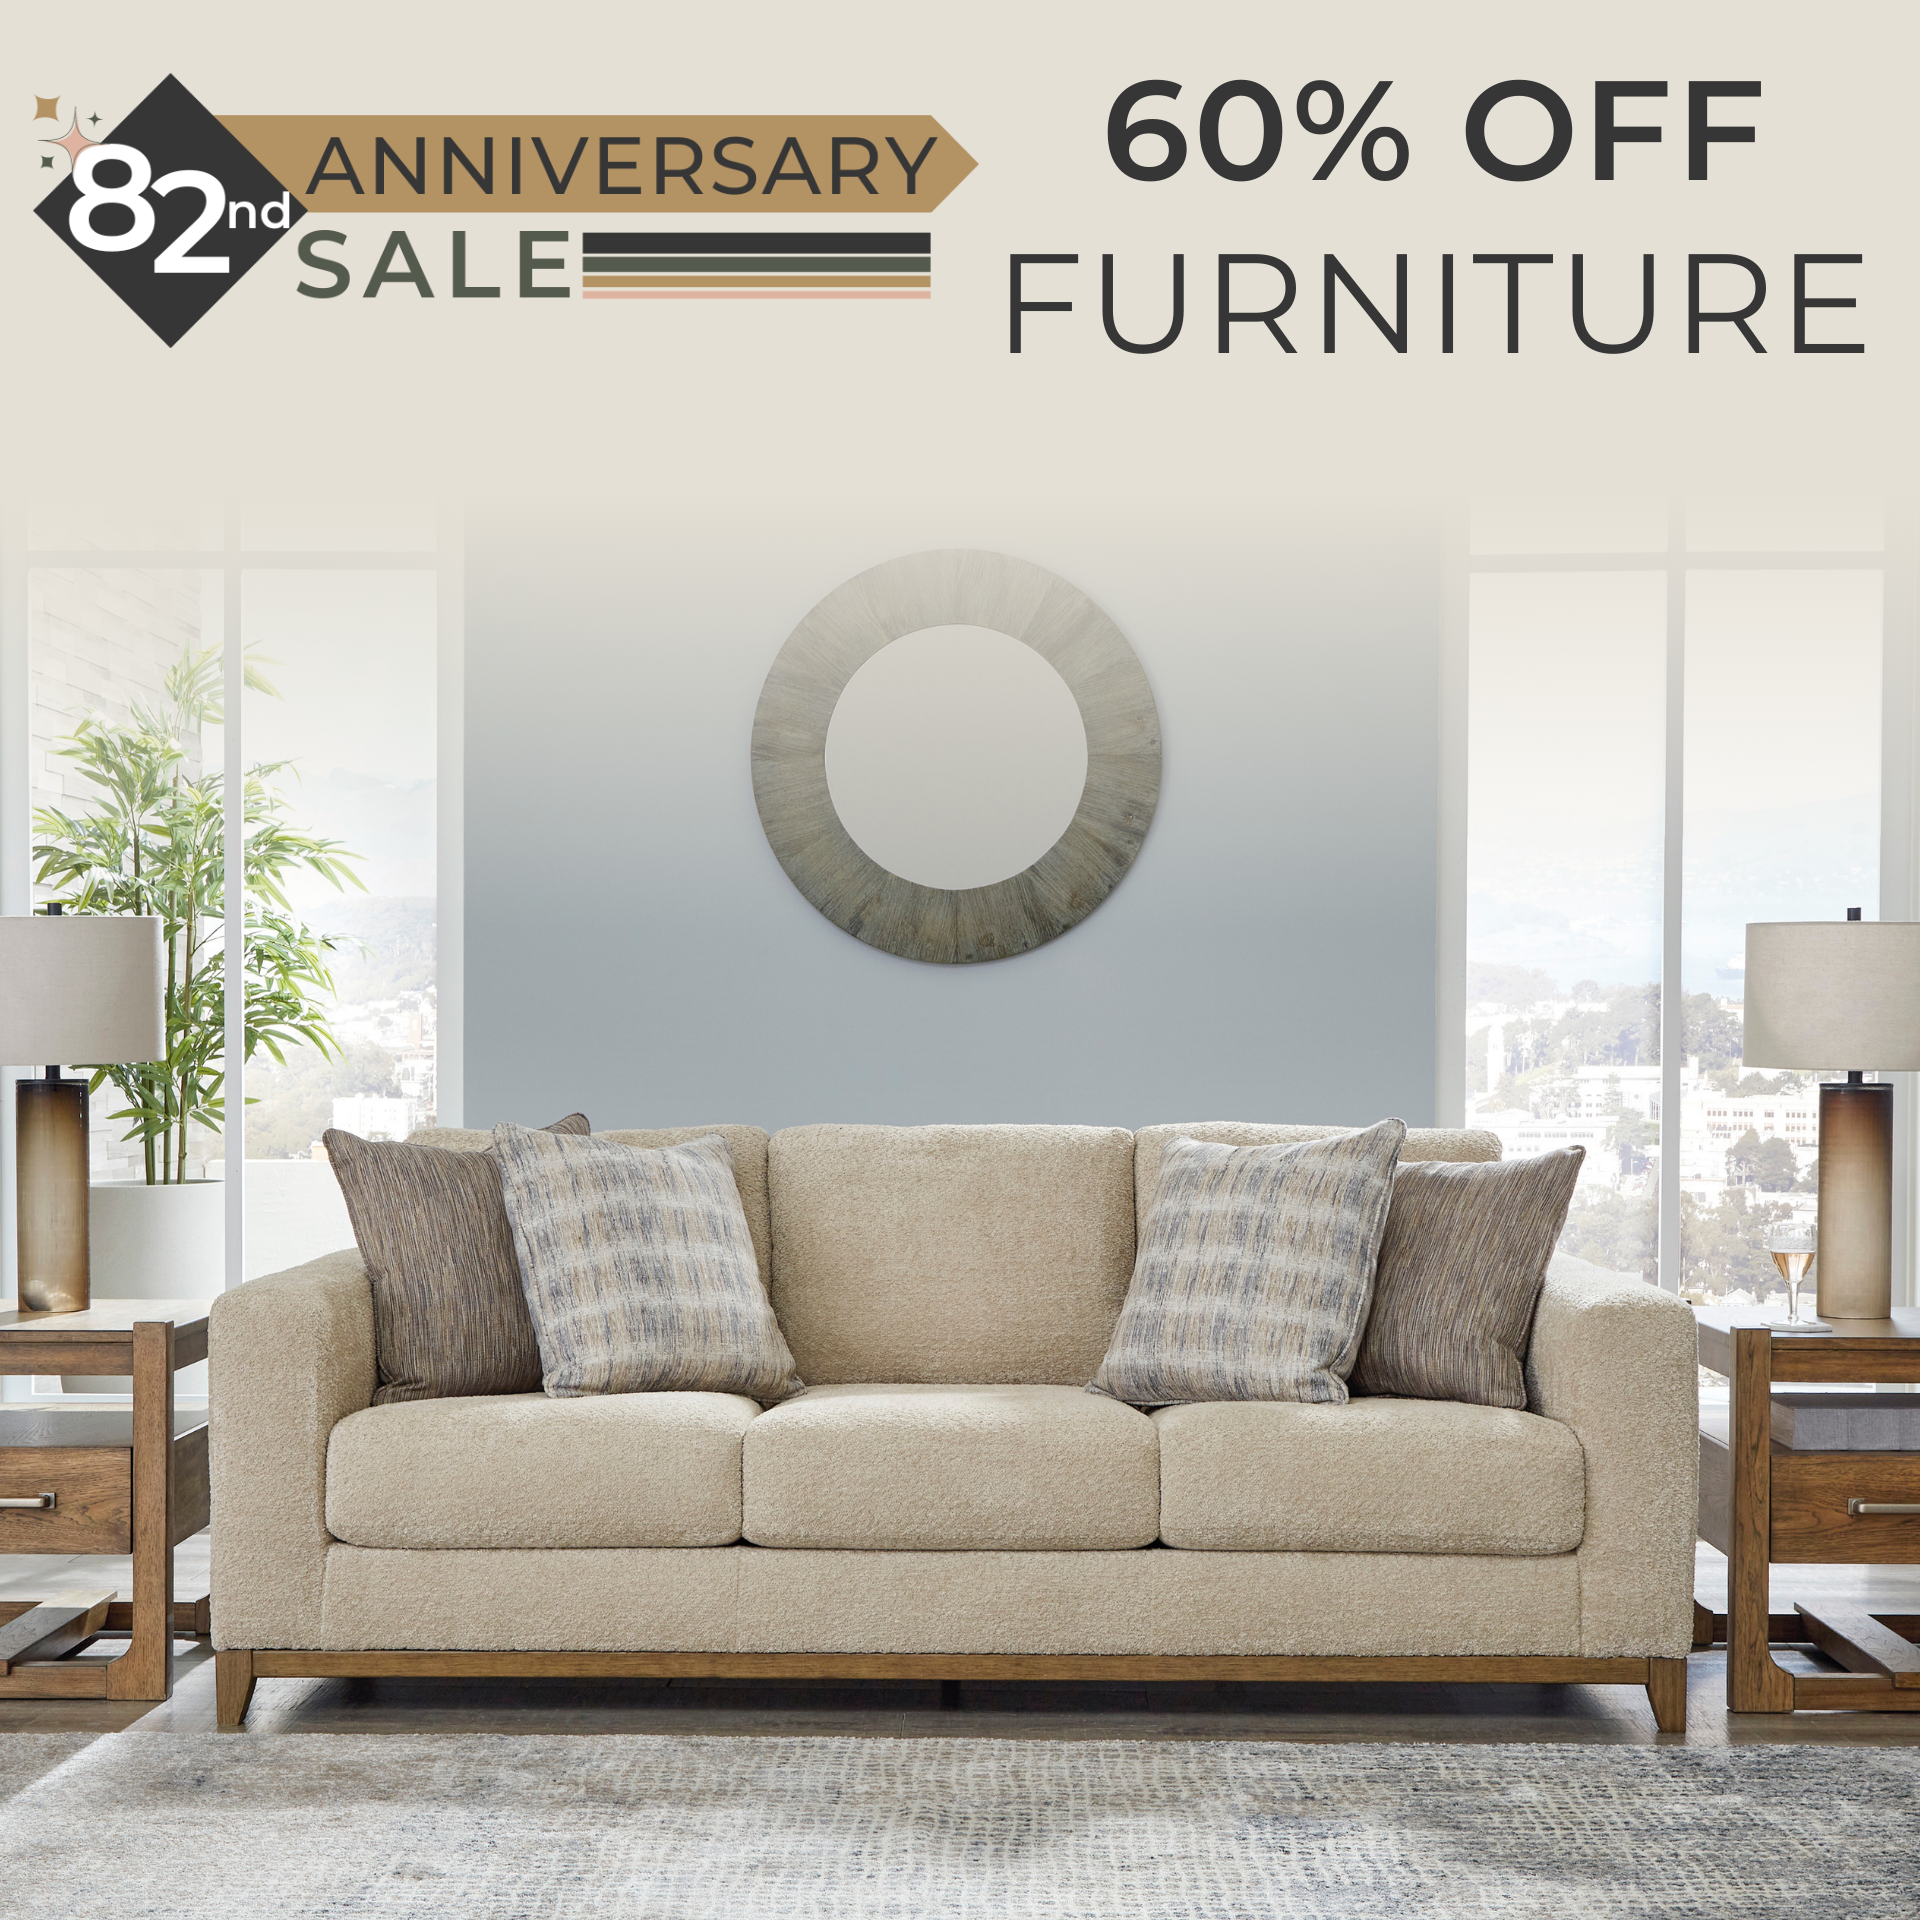 60% off on Furniture